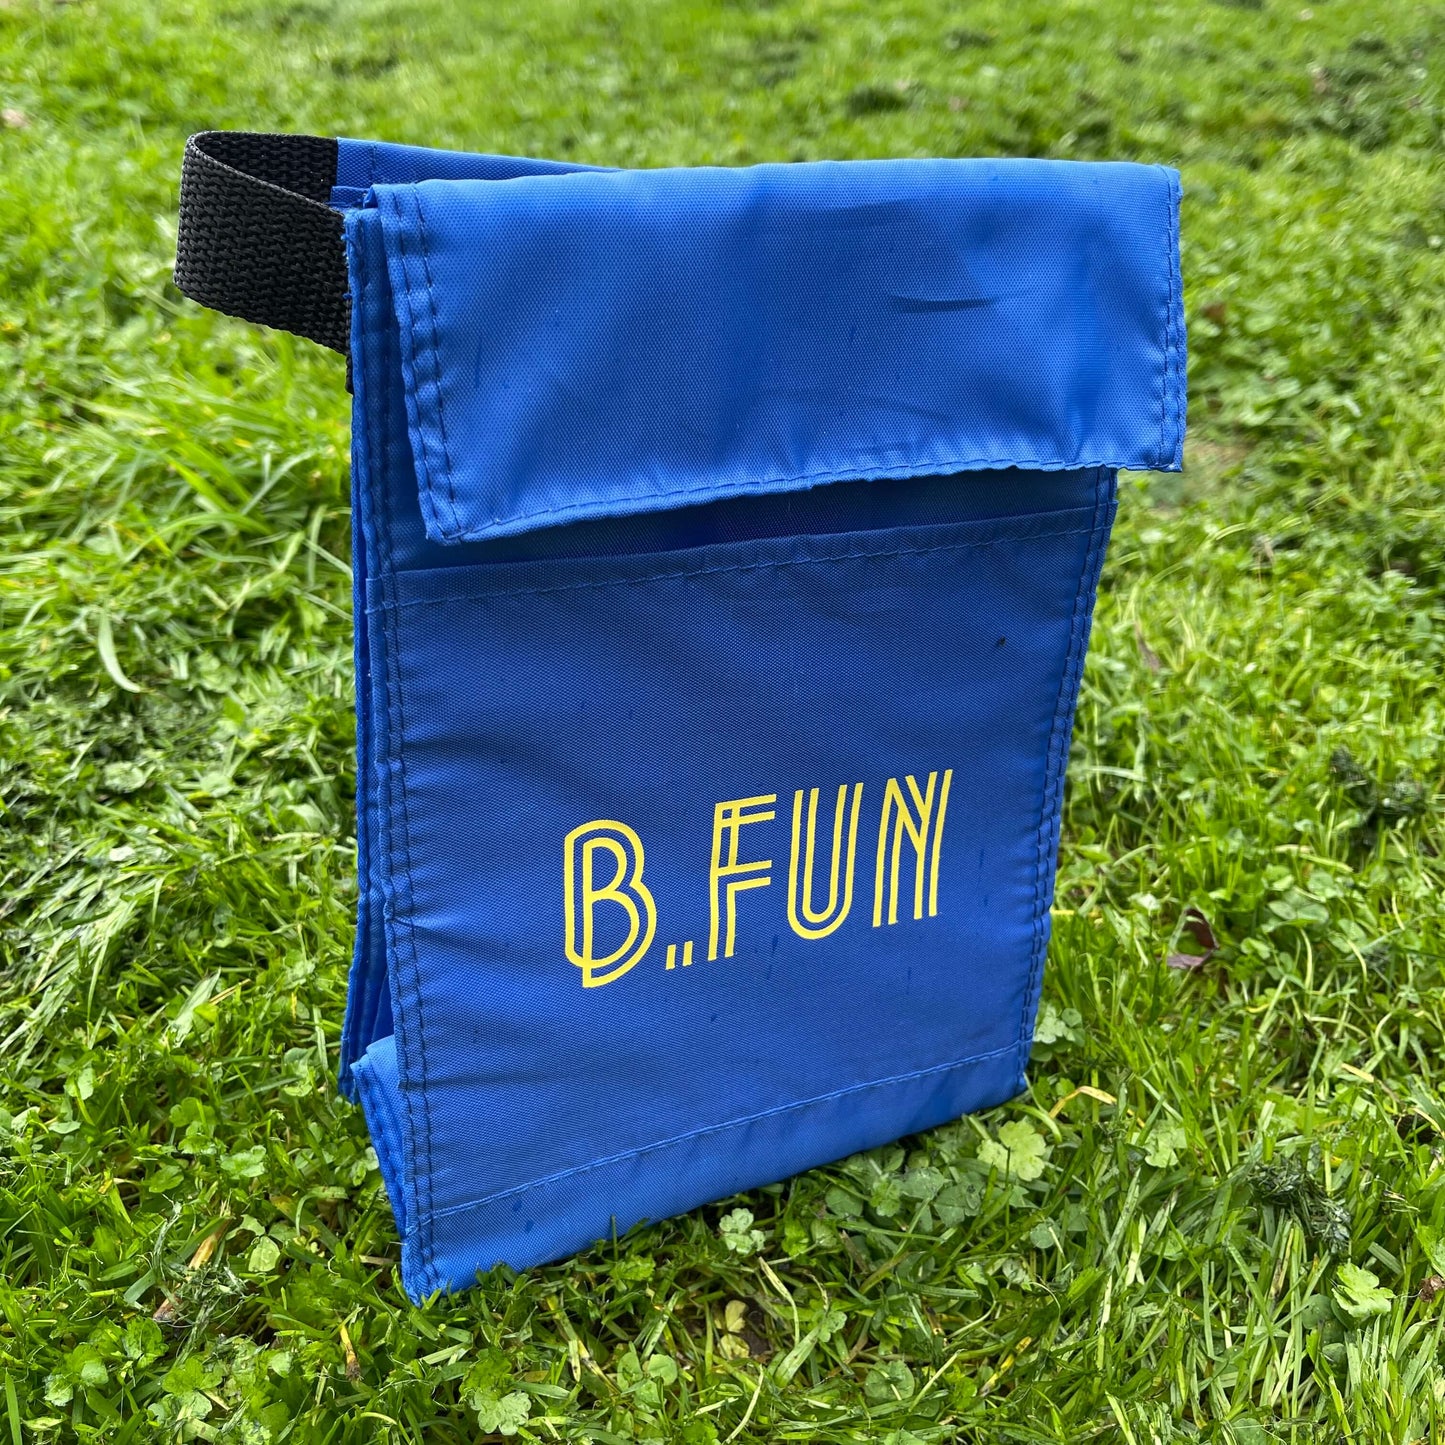 Insulated lunch carry bag in blue with yellow text saying B.FUN sitting on green grass.